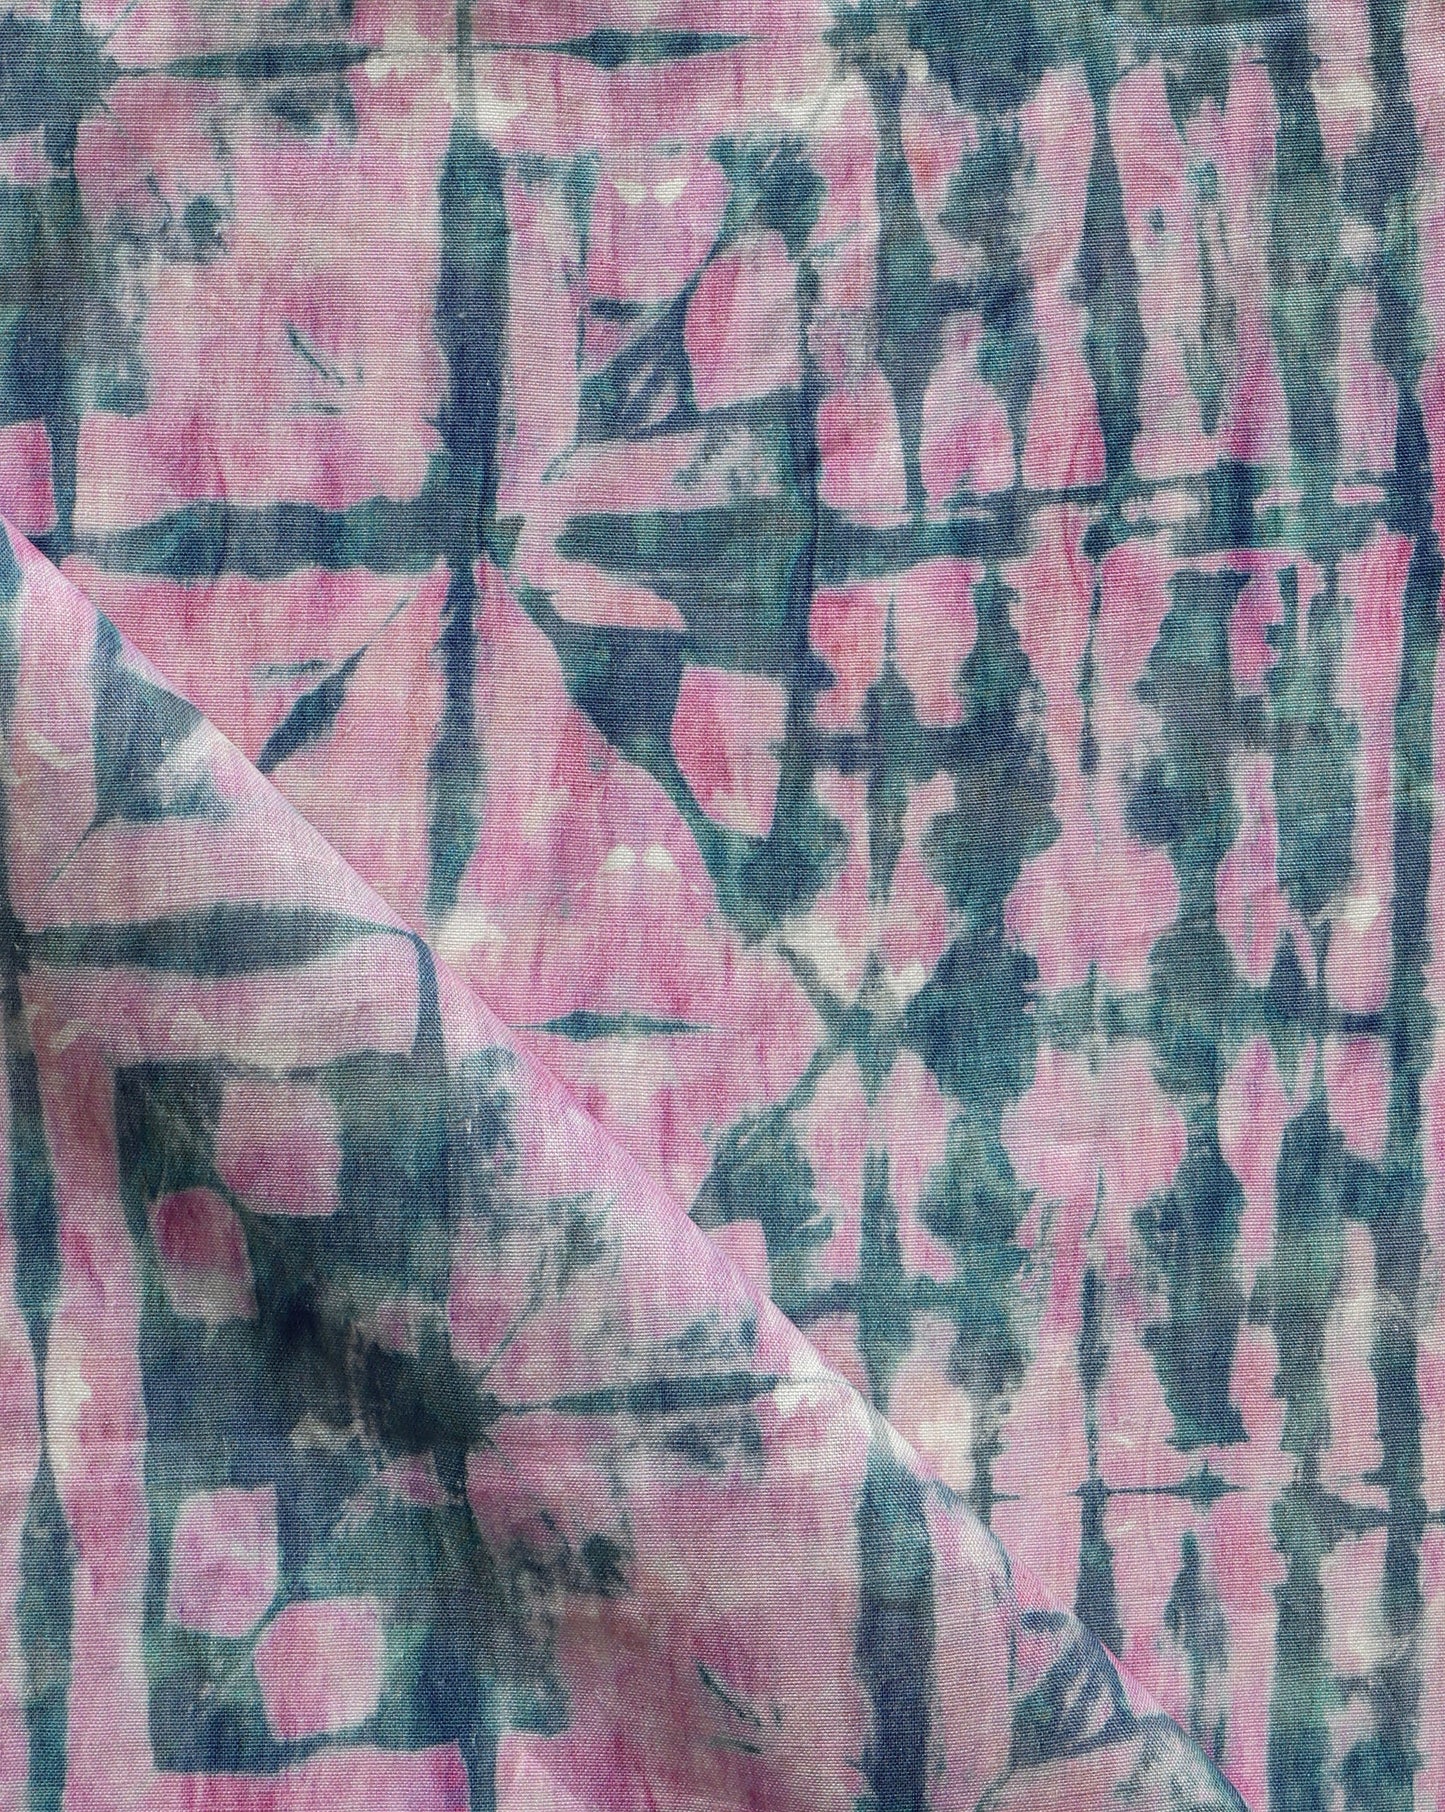 A high-end Banda Fabric with a pink and blue tie dyed pattern created using shibori tie-dye techniques